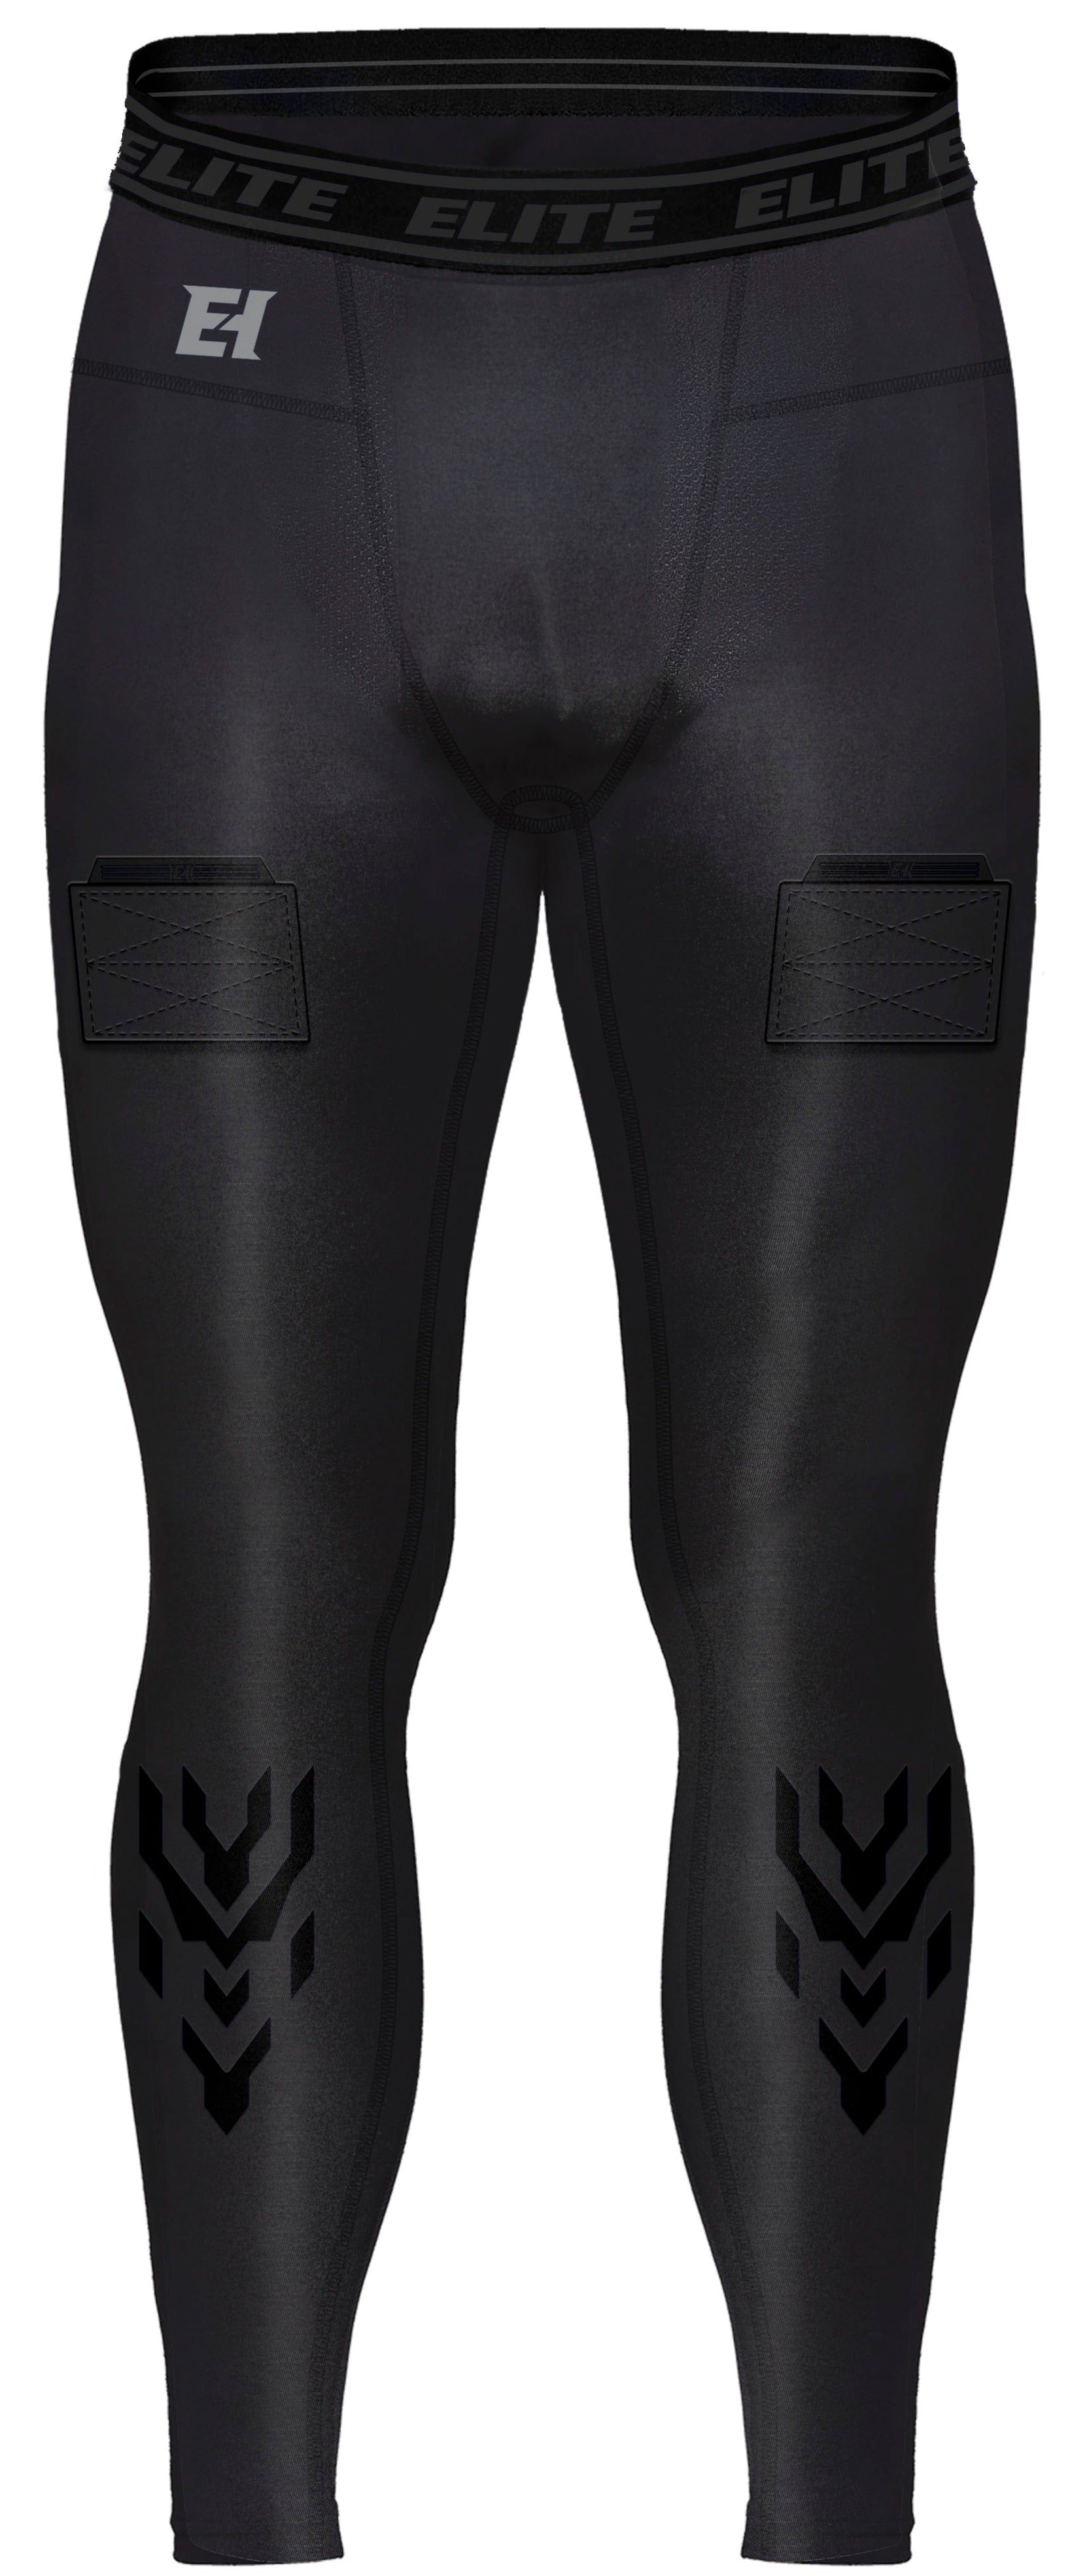 Elite Hockey Compression Pant with Jock/Tabs for Boys